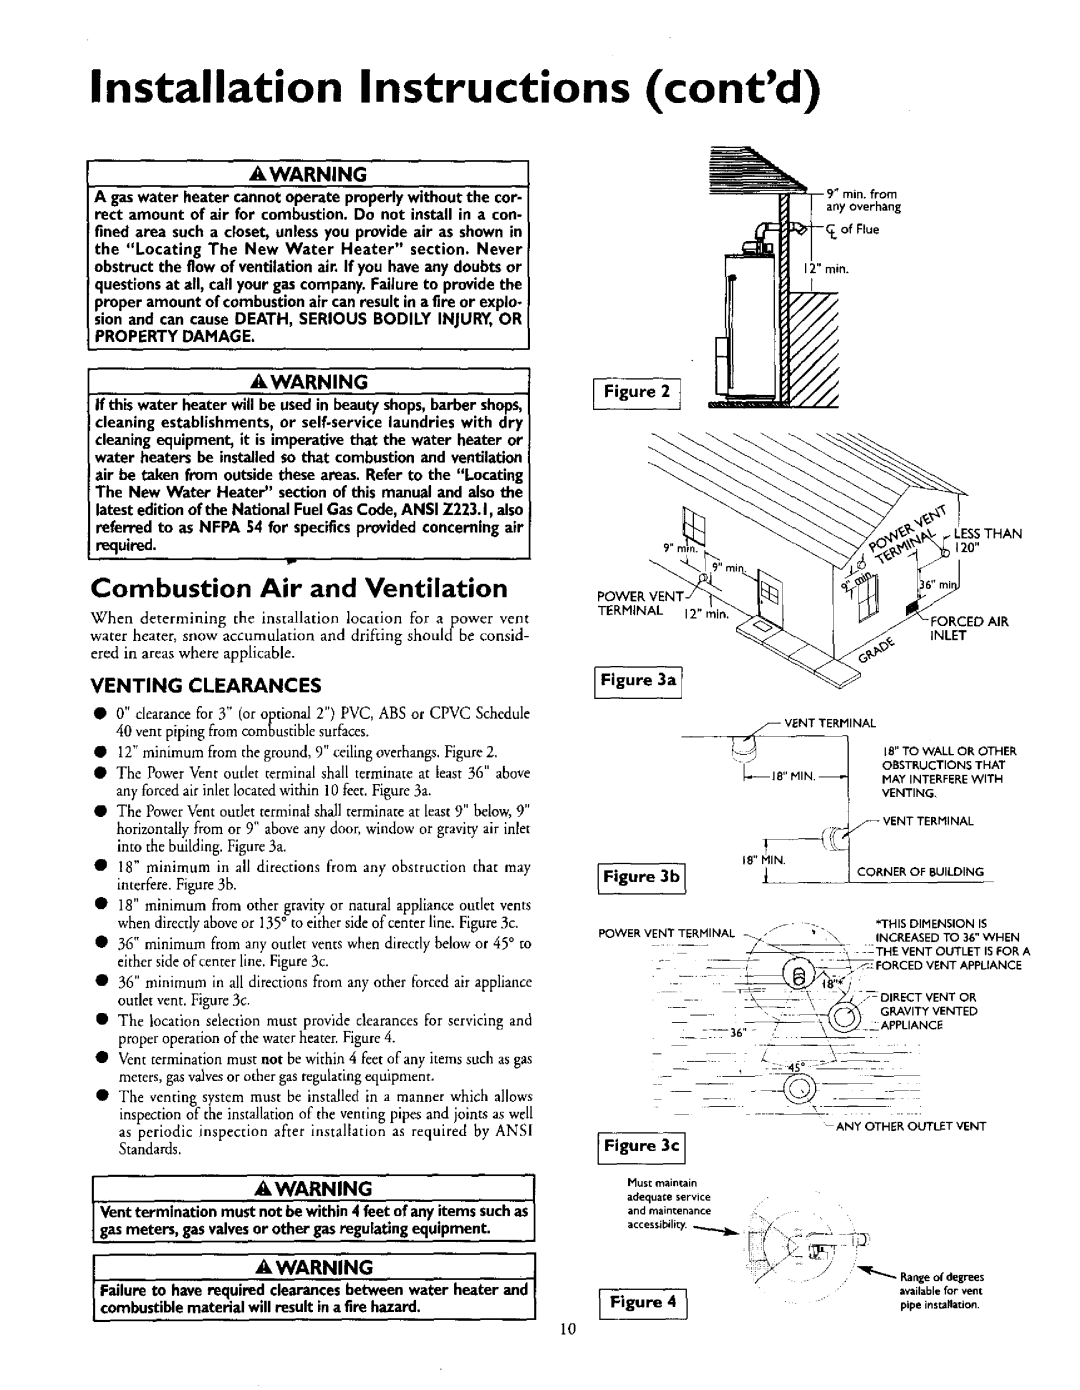 Kenmore 153.335943, 153.335863 F,gur, Installation Instructions, contd, Combustion Air and Ventilation, Awarning, iWARNING 